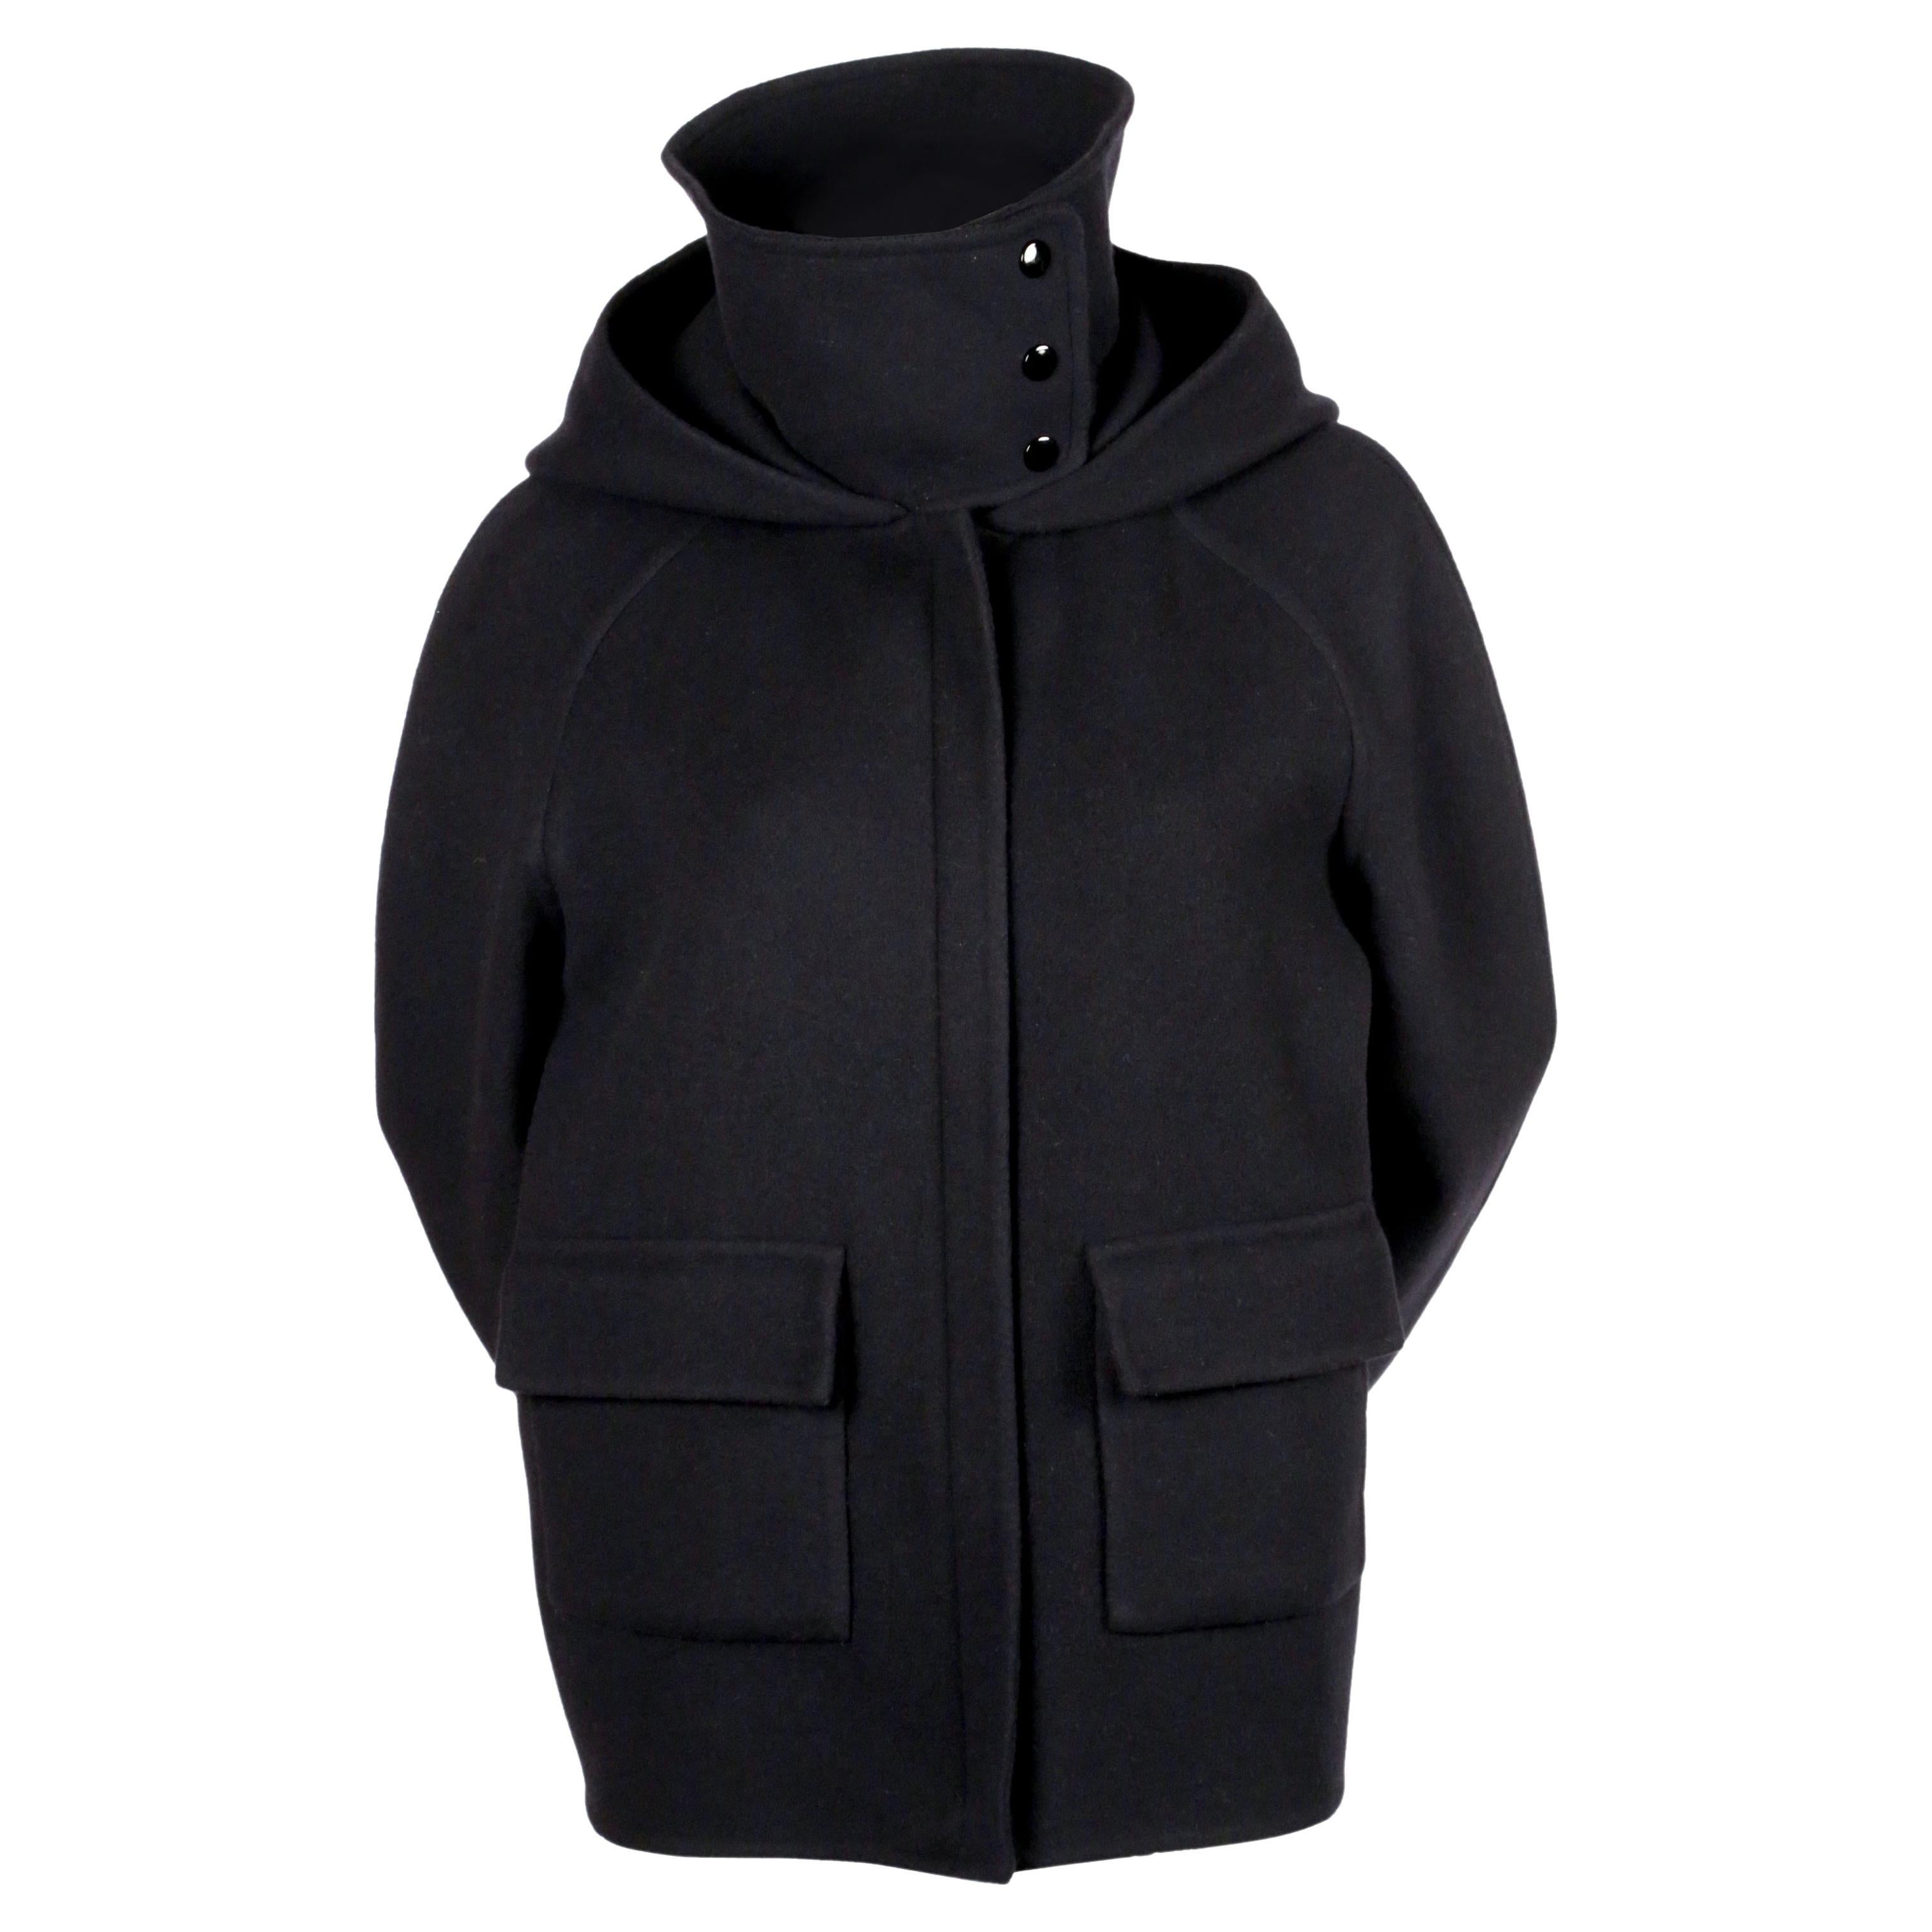 new 2014 CELINE by PHOEBE PHILO navy hooded cashmere jacket with patch pockets